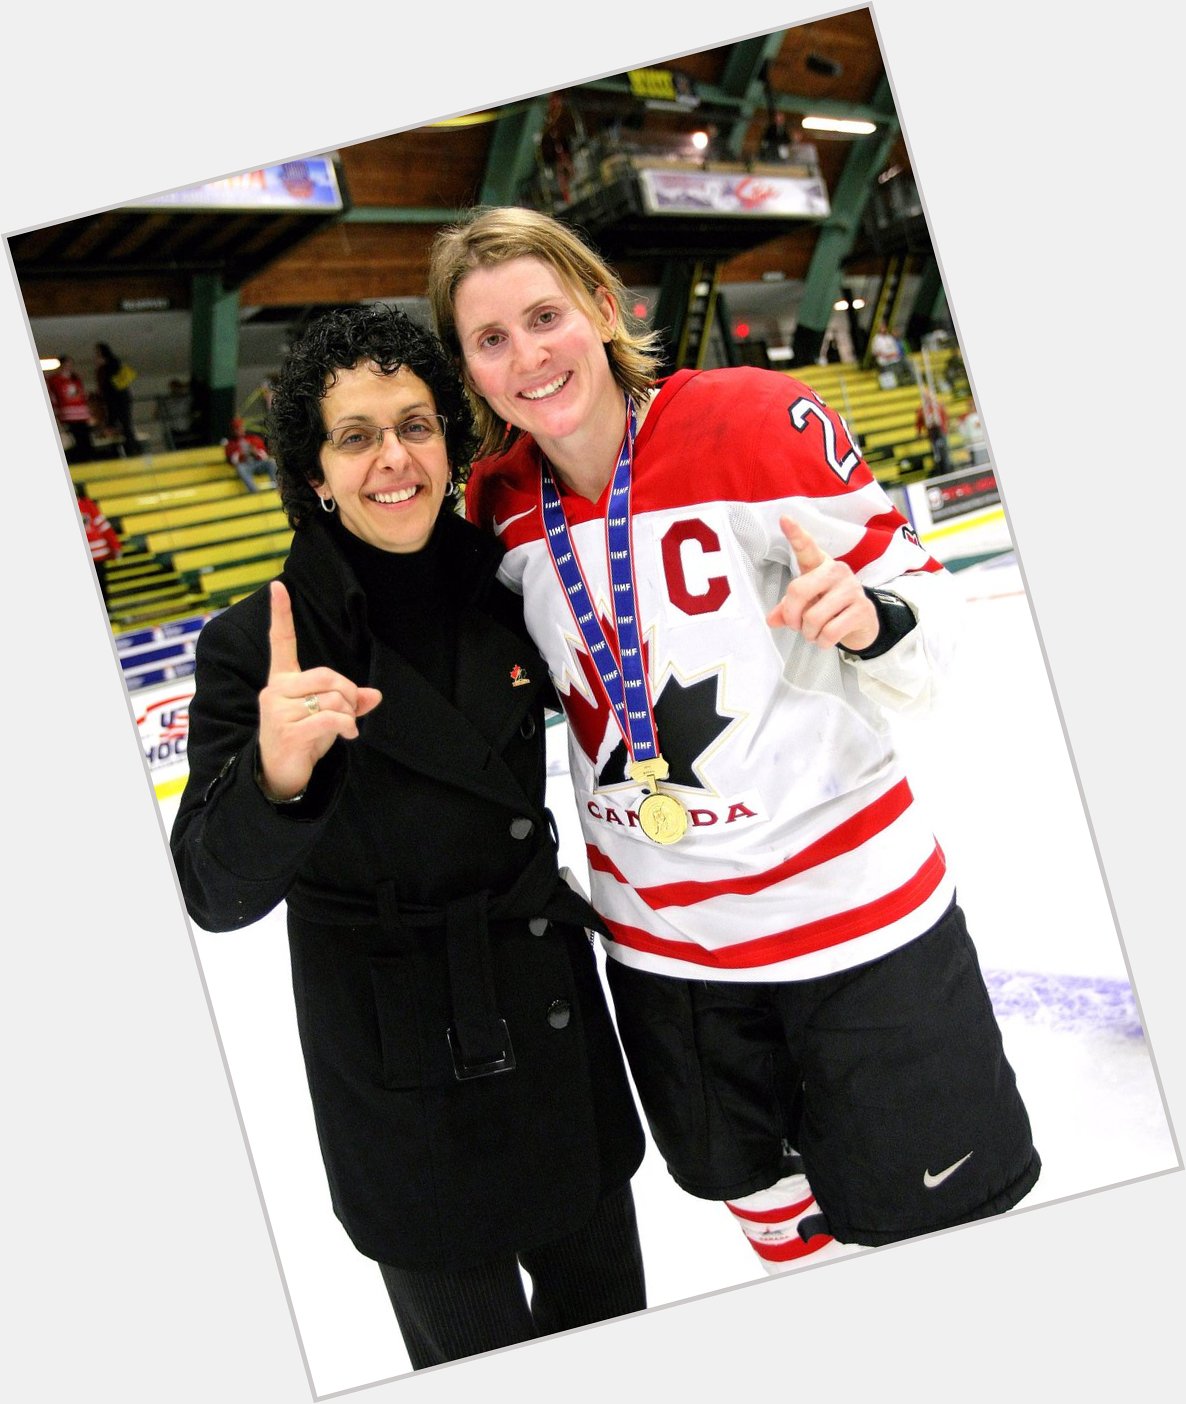 Happy Birthday goes out to Hayley Wickenheiser, pictured here with 2017 Inductee Danielle Goyette! 